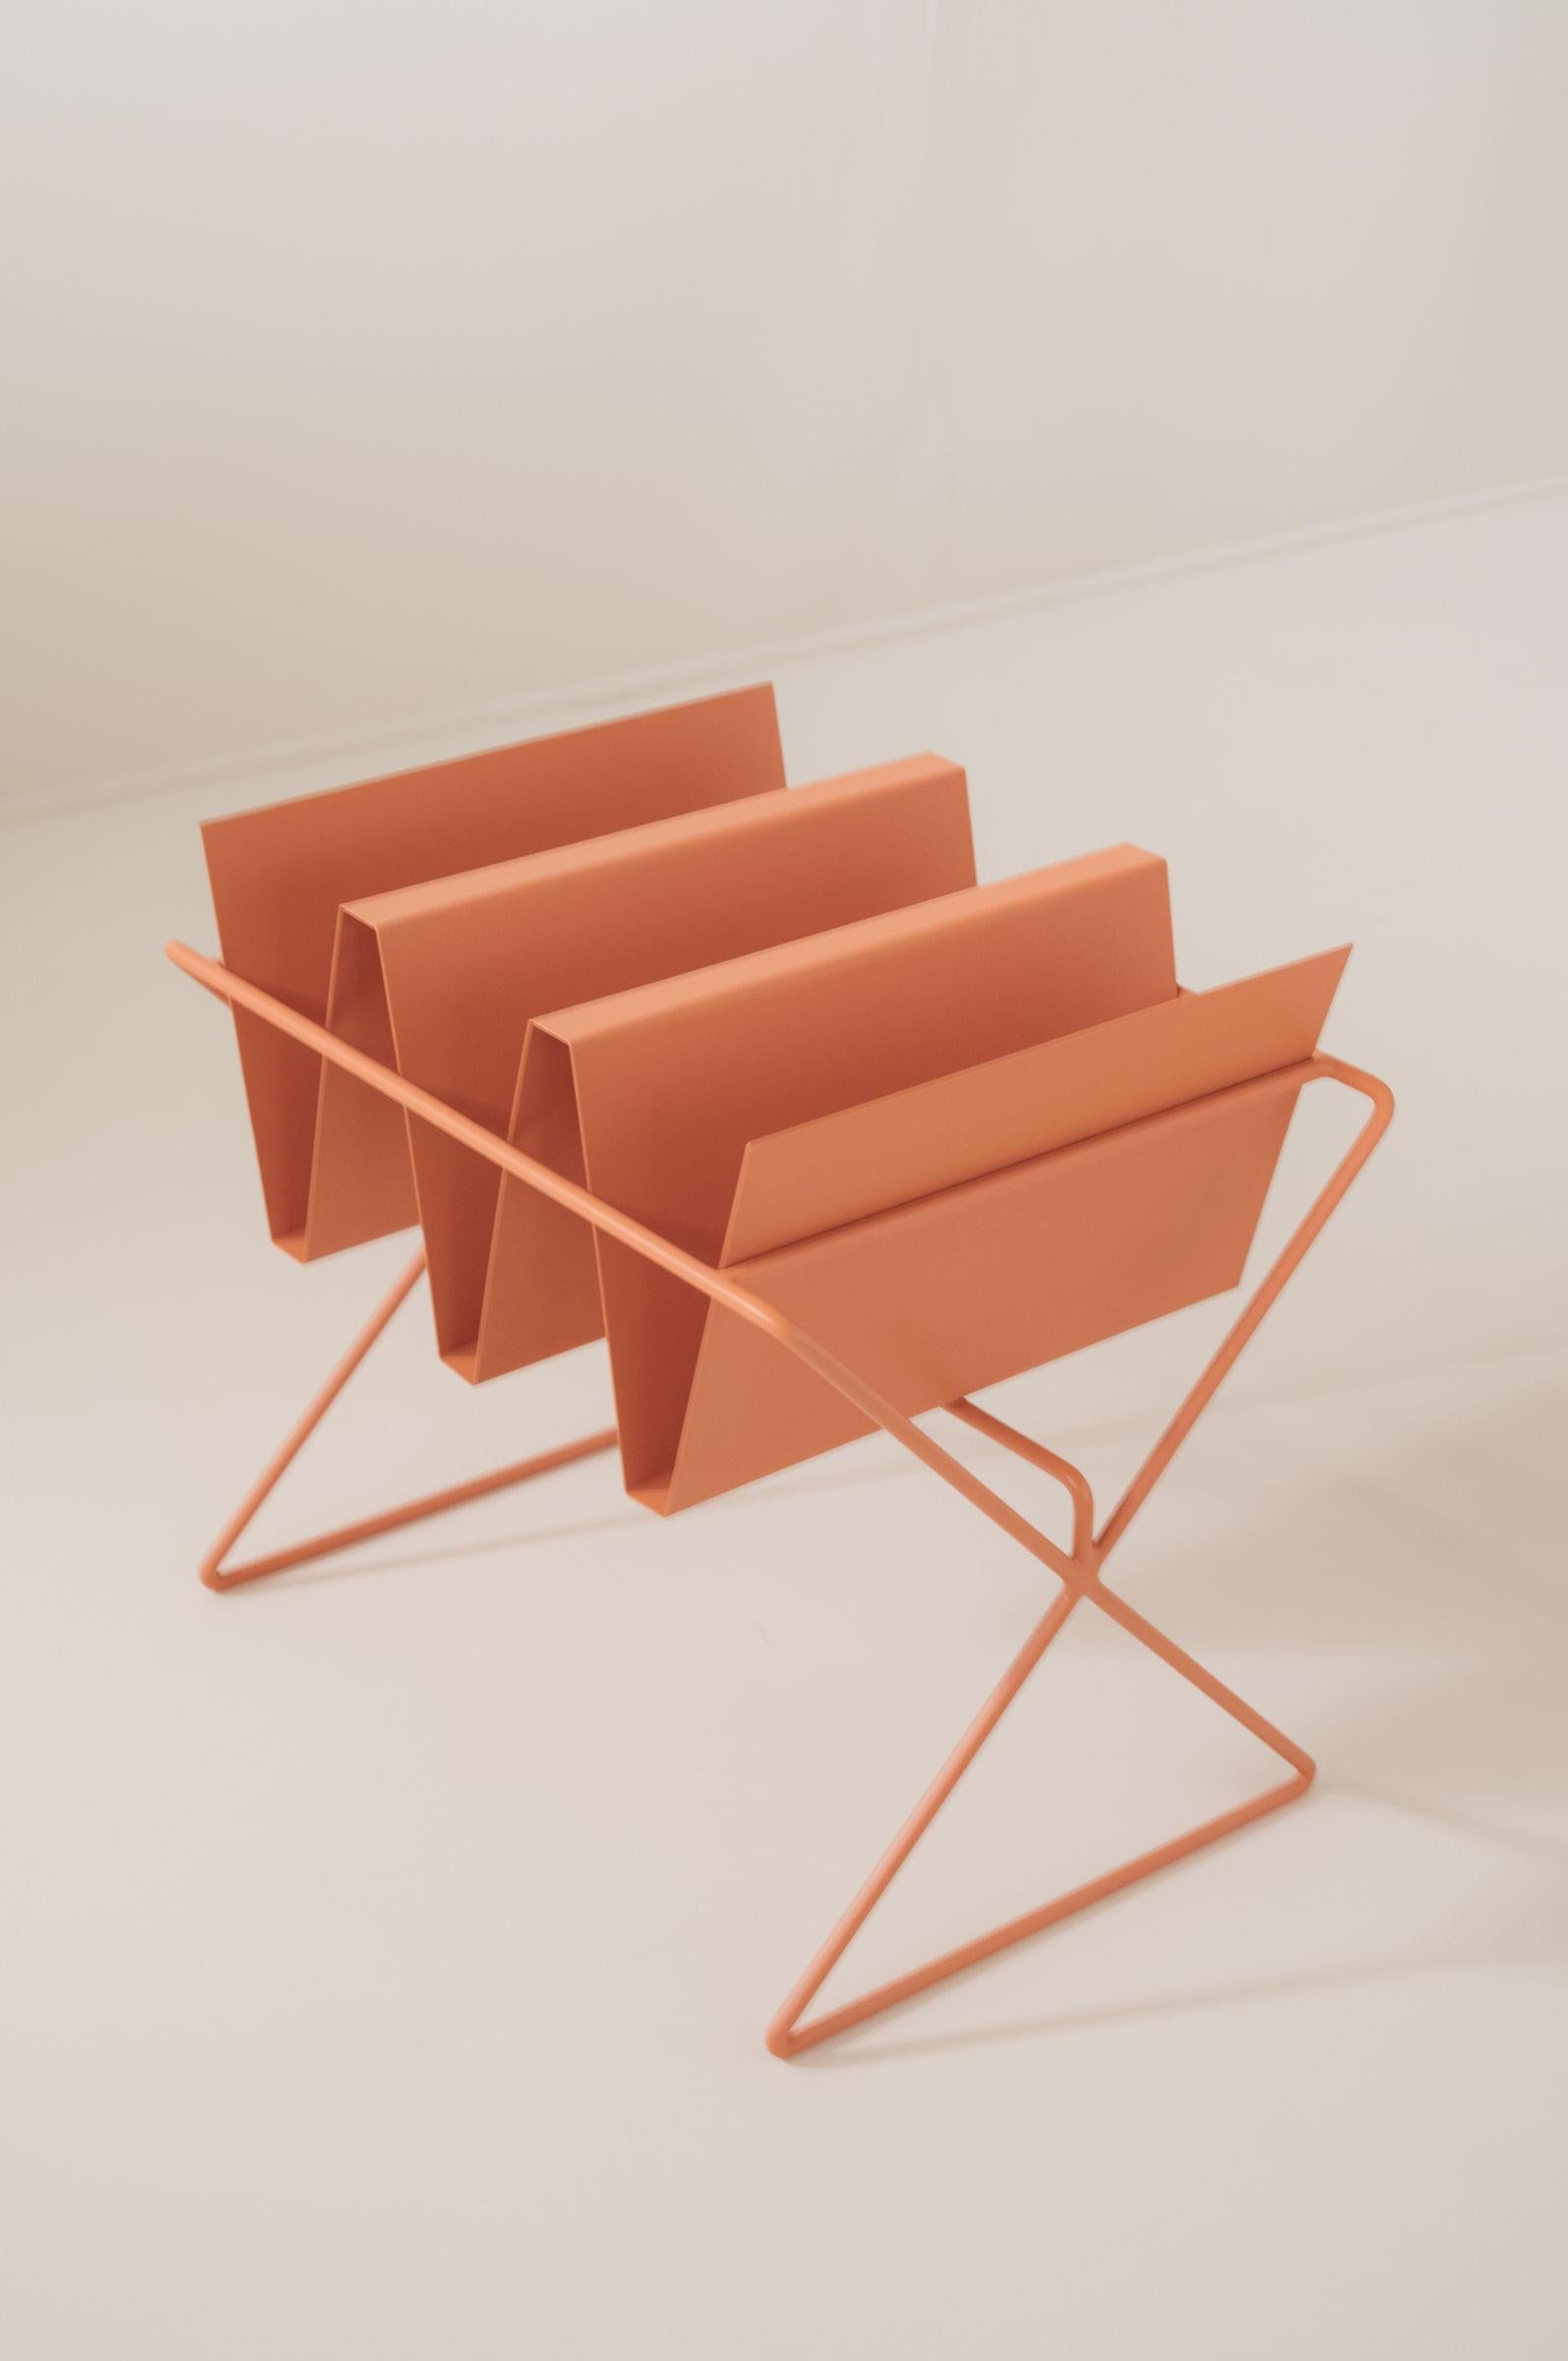 Post-modern sculpture Brutante B in terracotta lacquered metal handmade in Panama by Fi.

Brutantes Presents a series of functional sculptural objects created from the mixture, abstraction and transmutation between everyday artifacts and